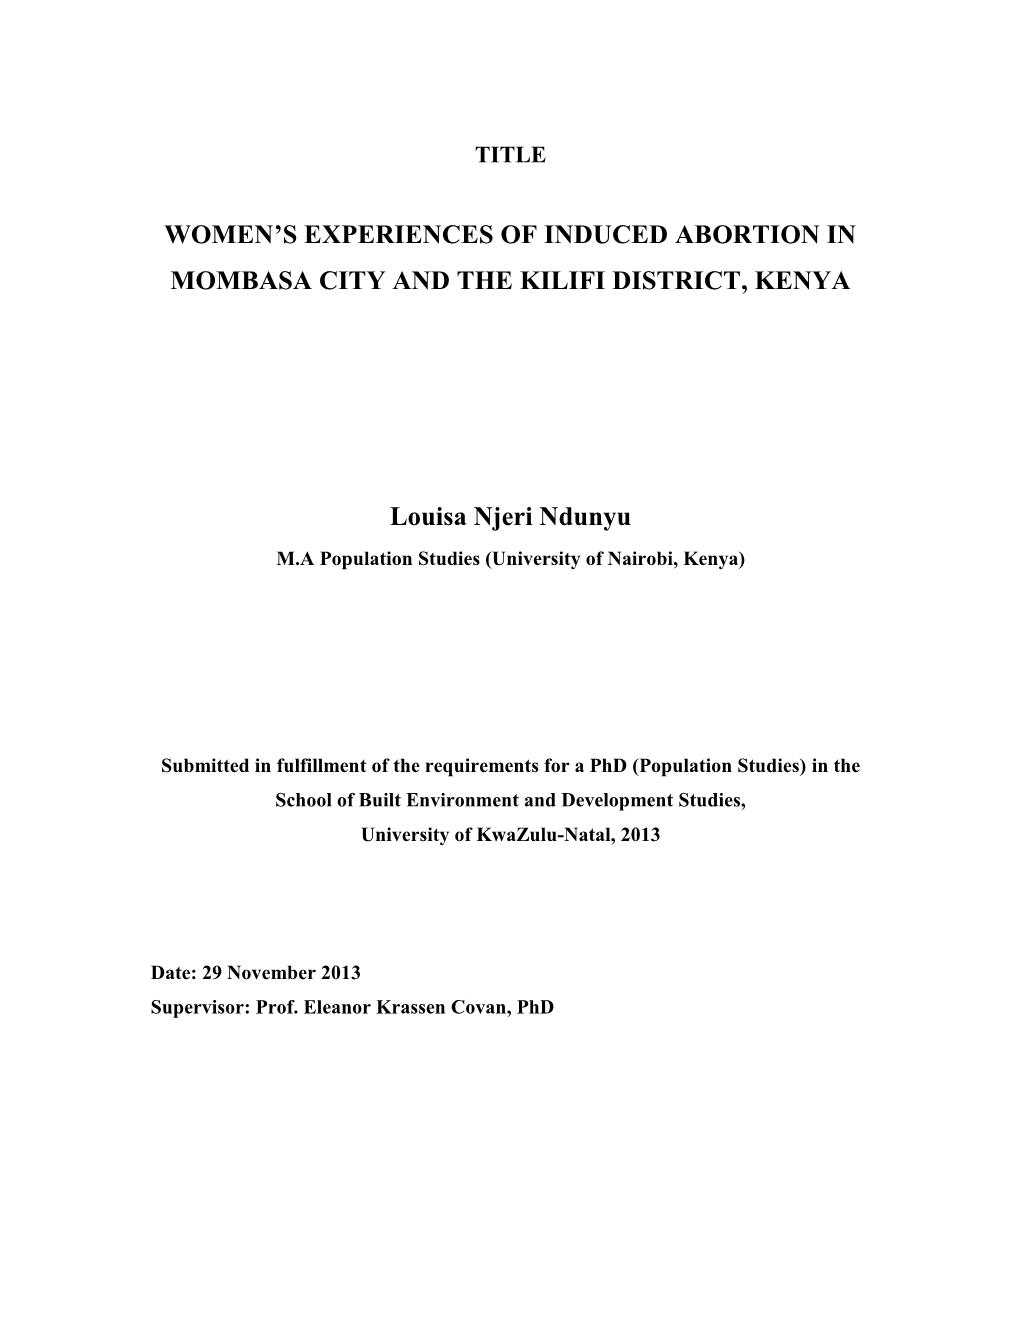 Women's Experiences of Induced Abortion In